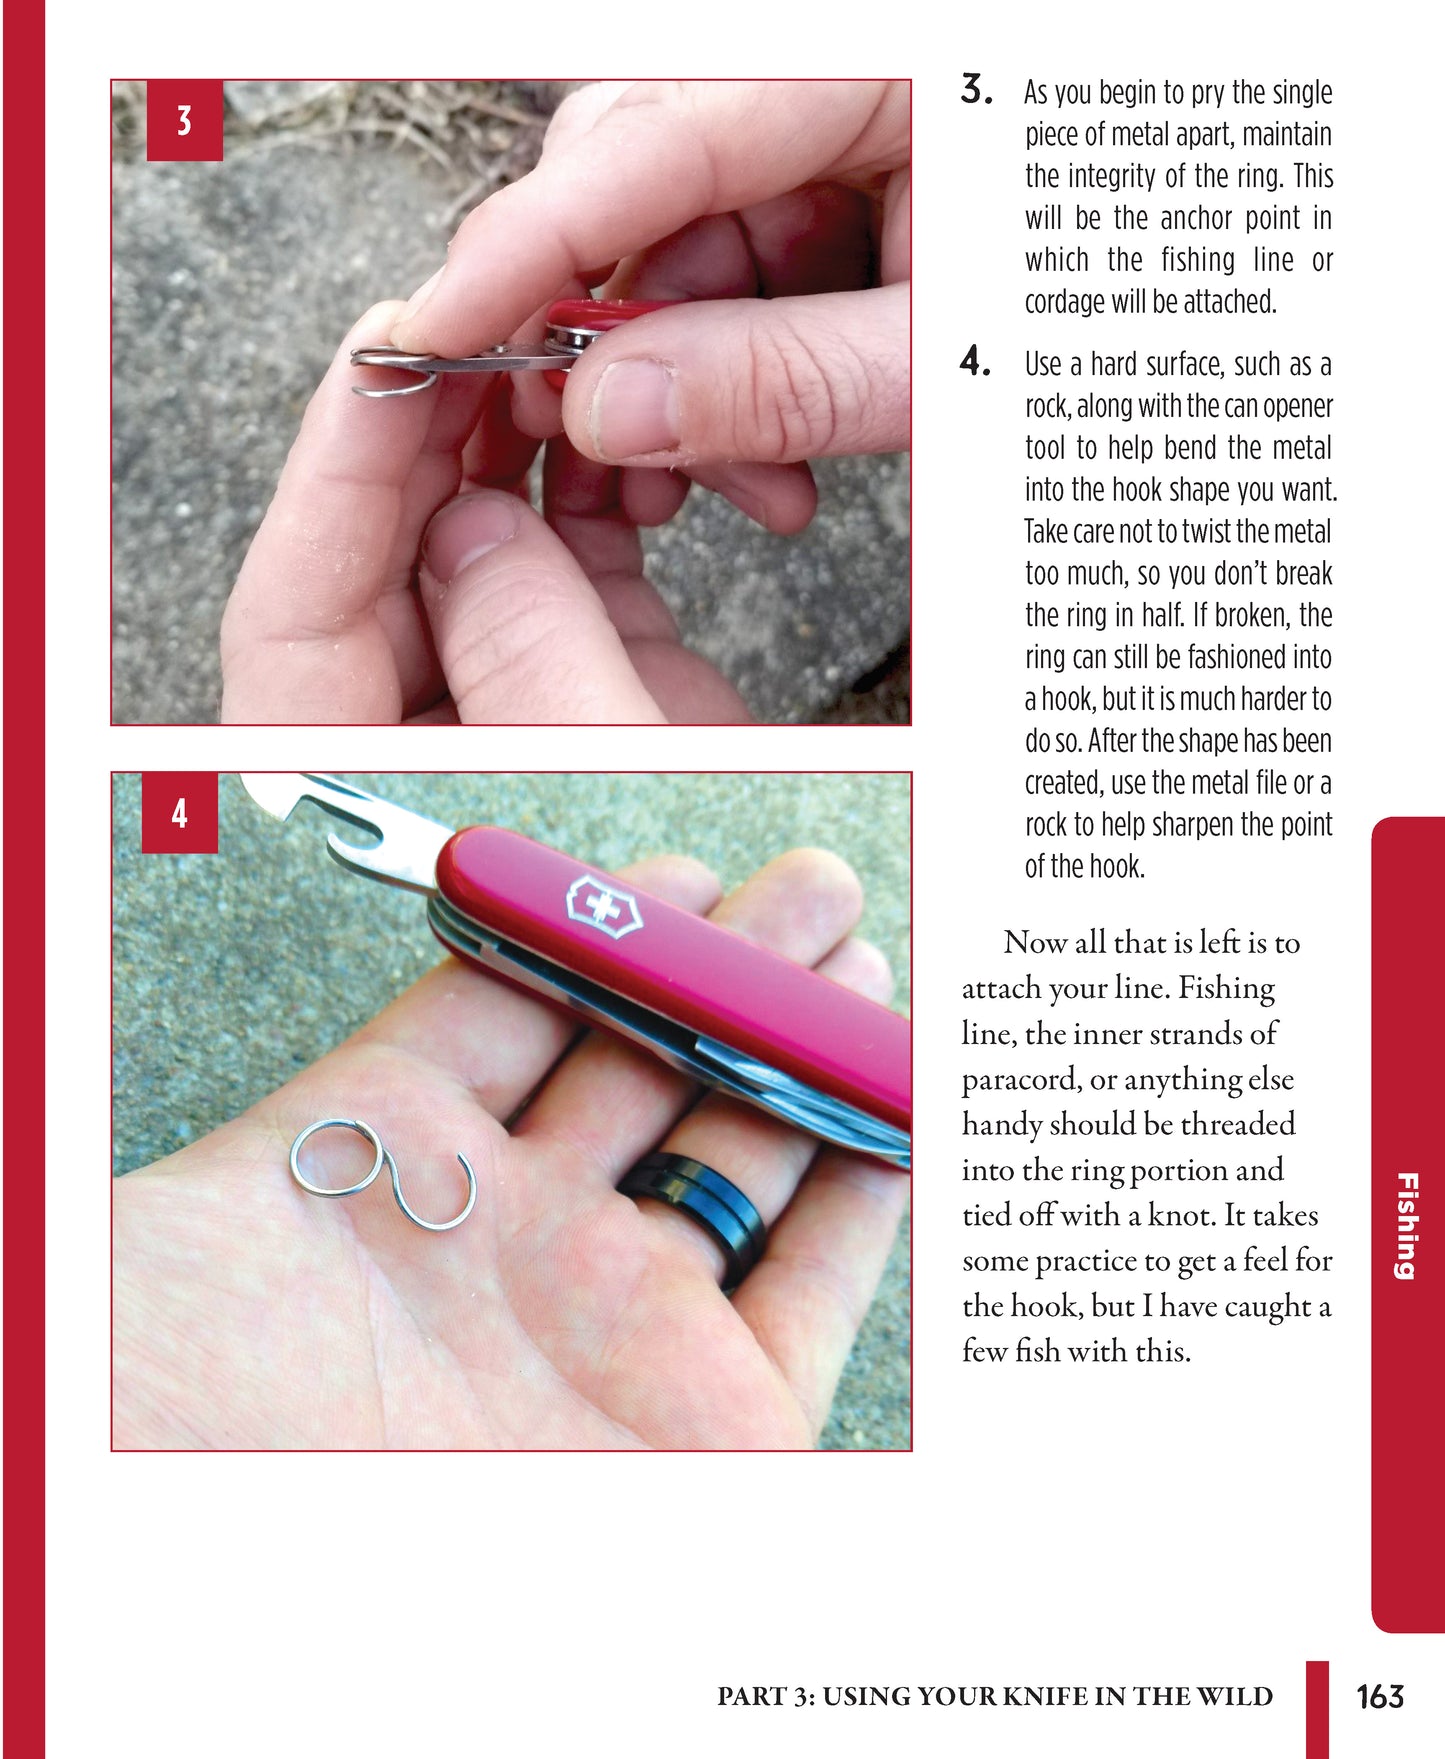 Victorinox Swiss Army Knife Camping & Outdoor Survival Guide